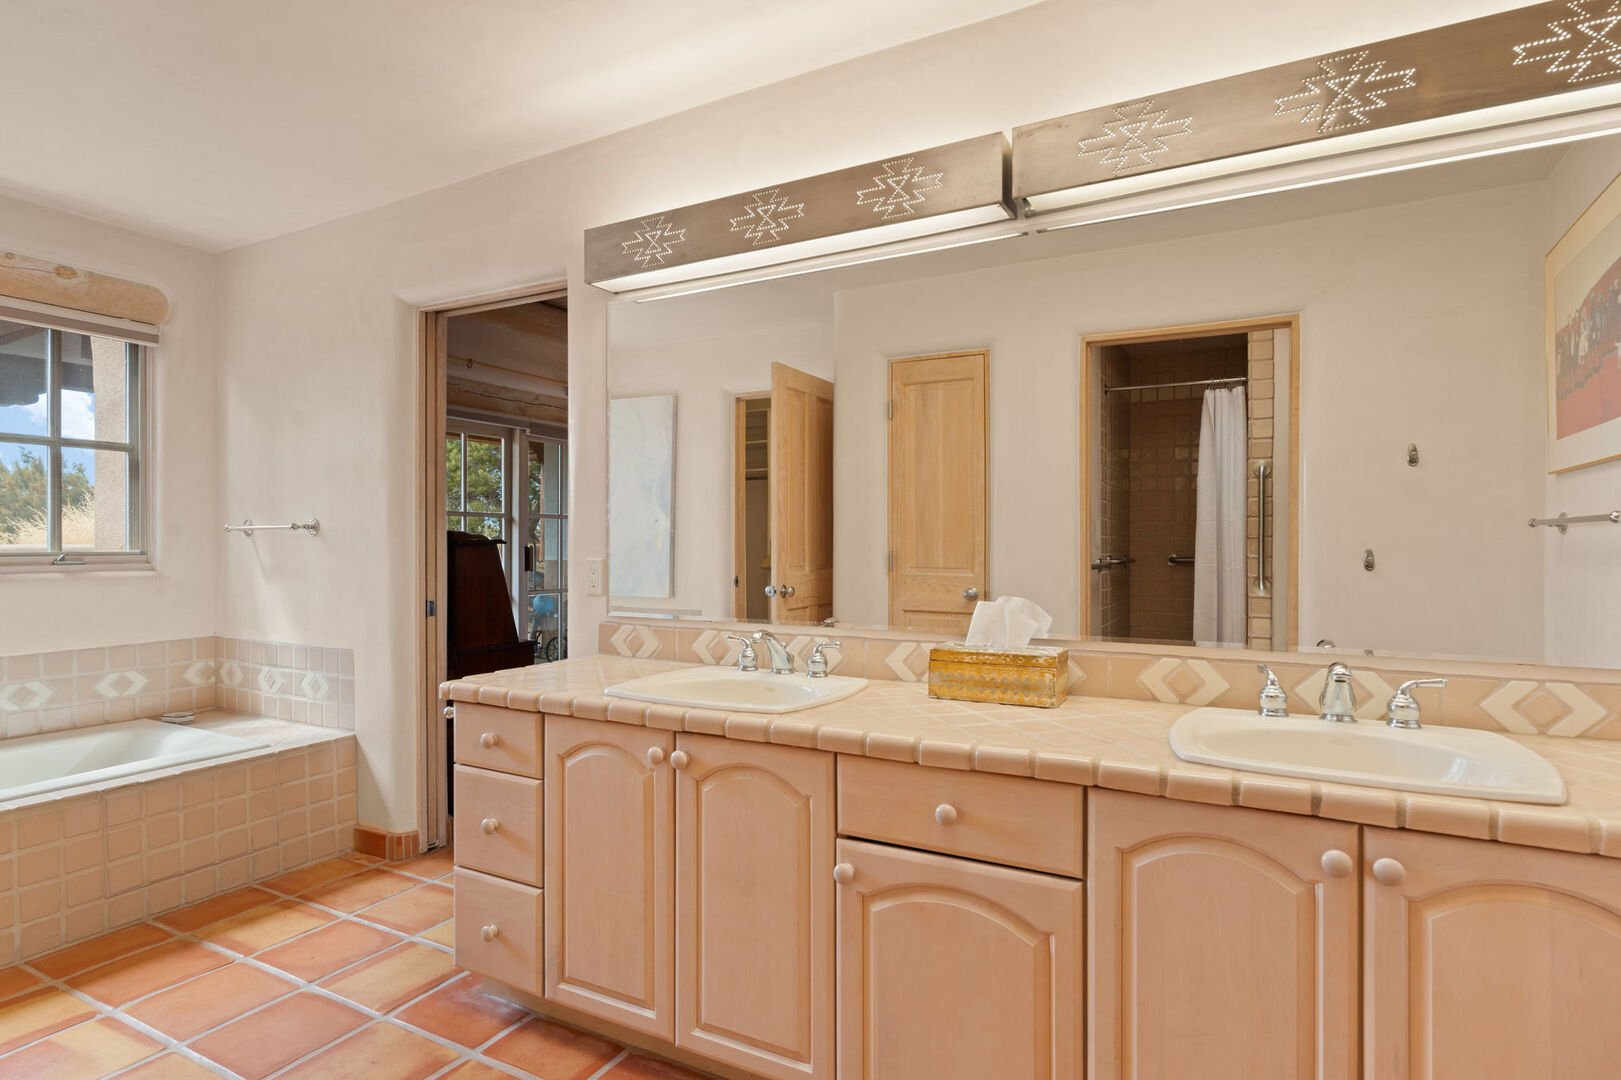 Primary bathroom with double vanities and a large tub